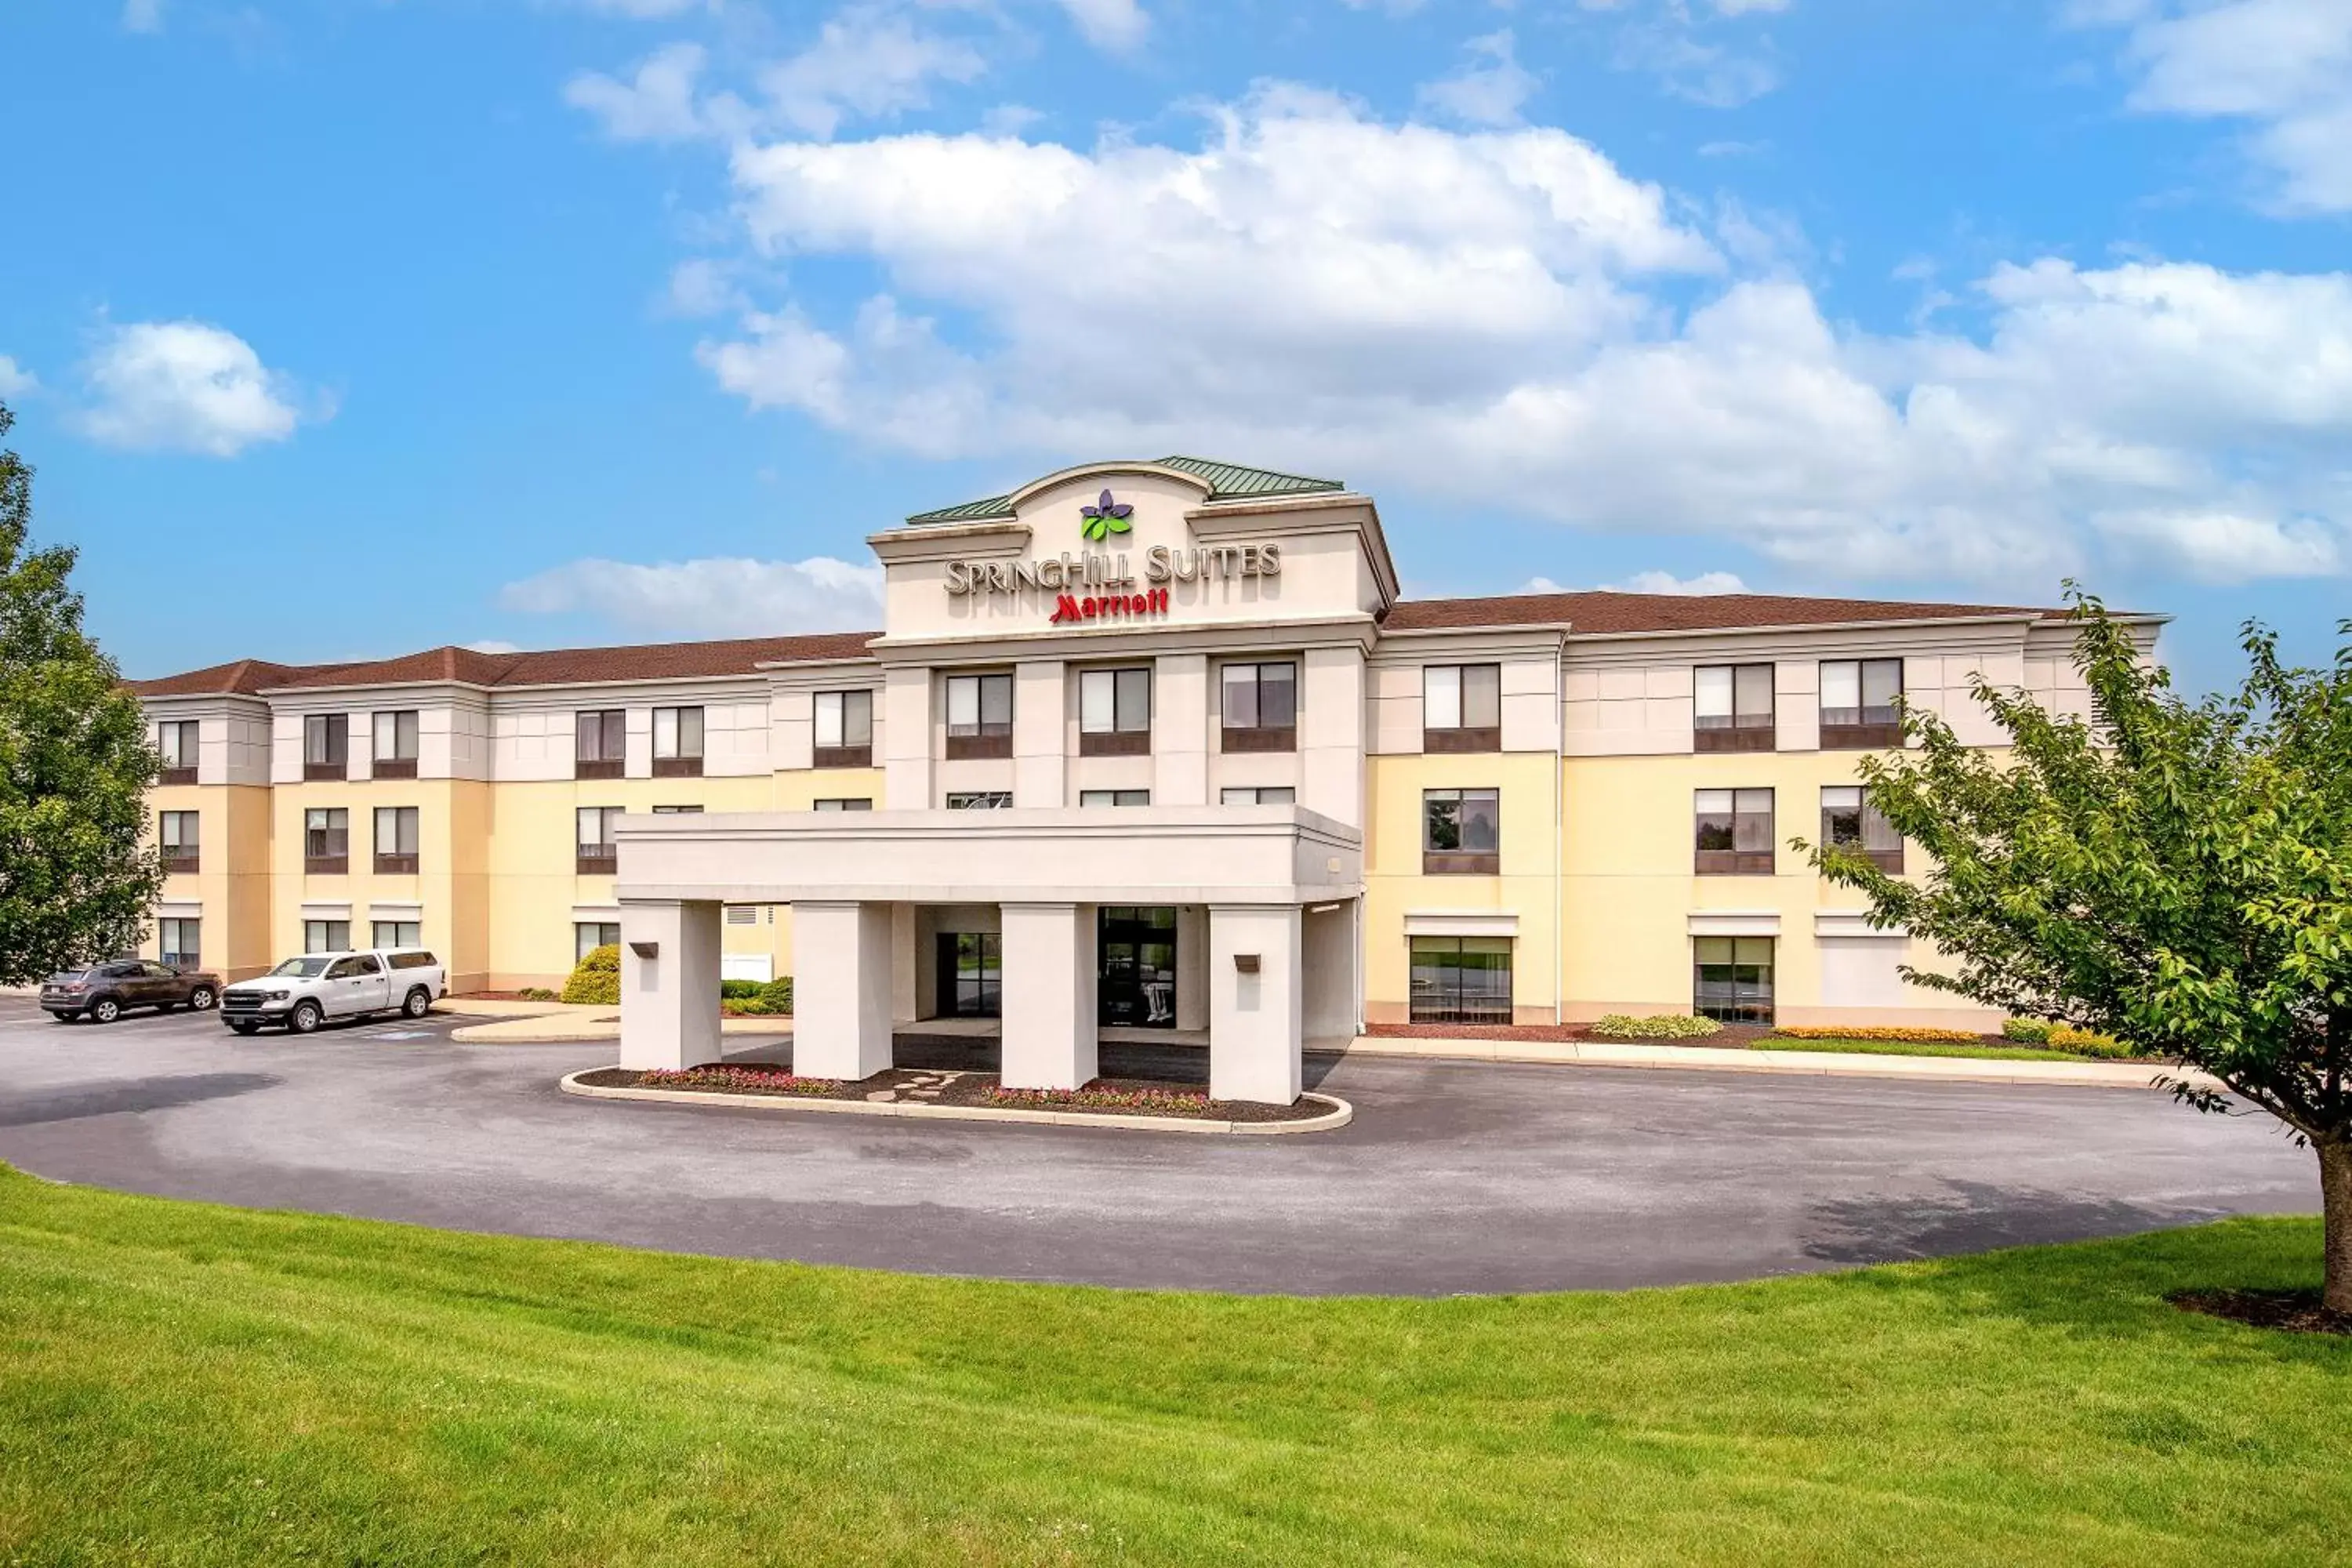 Property Building in SpringHill Suites by Marriott Hershey Near The Park